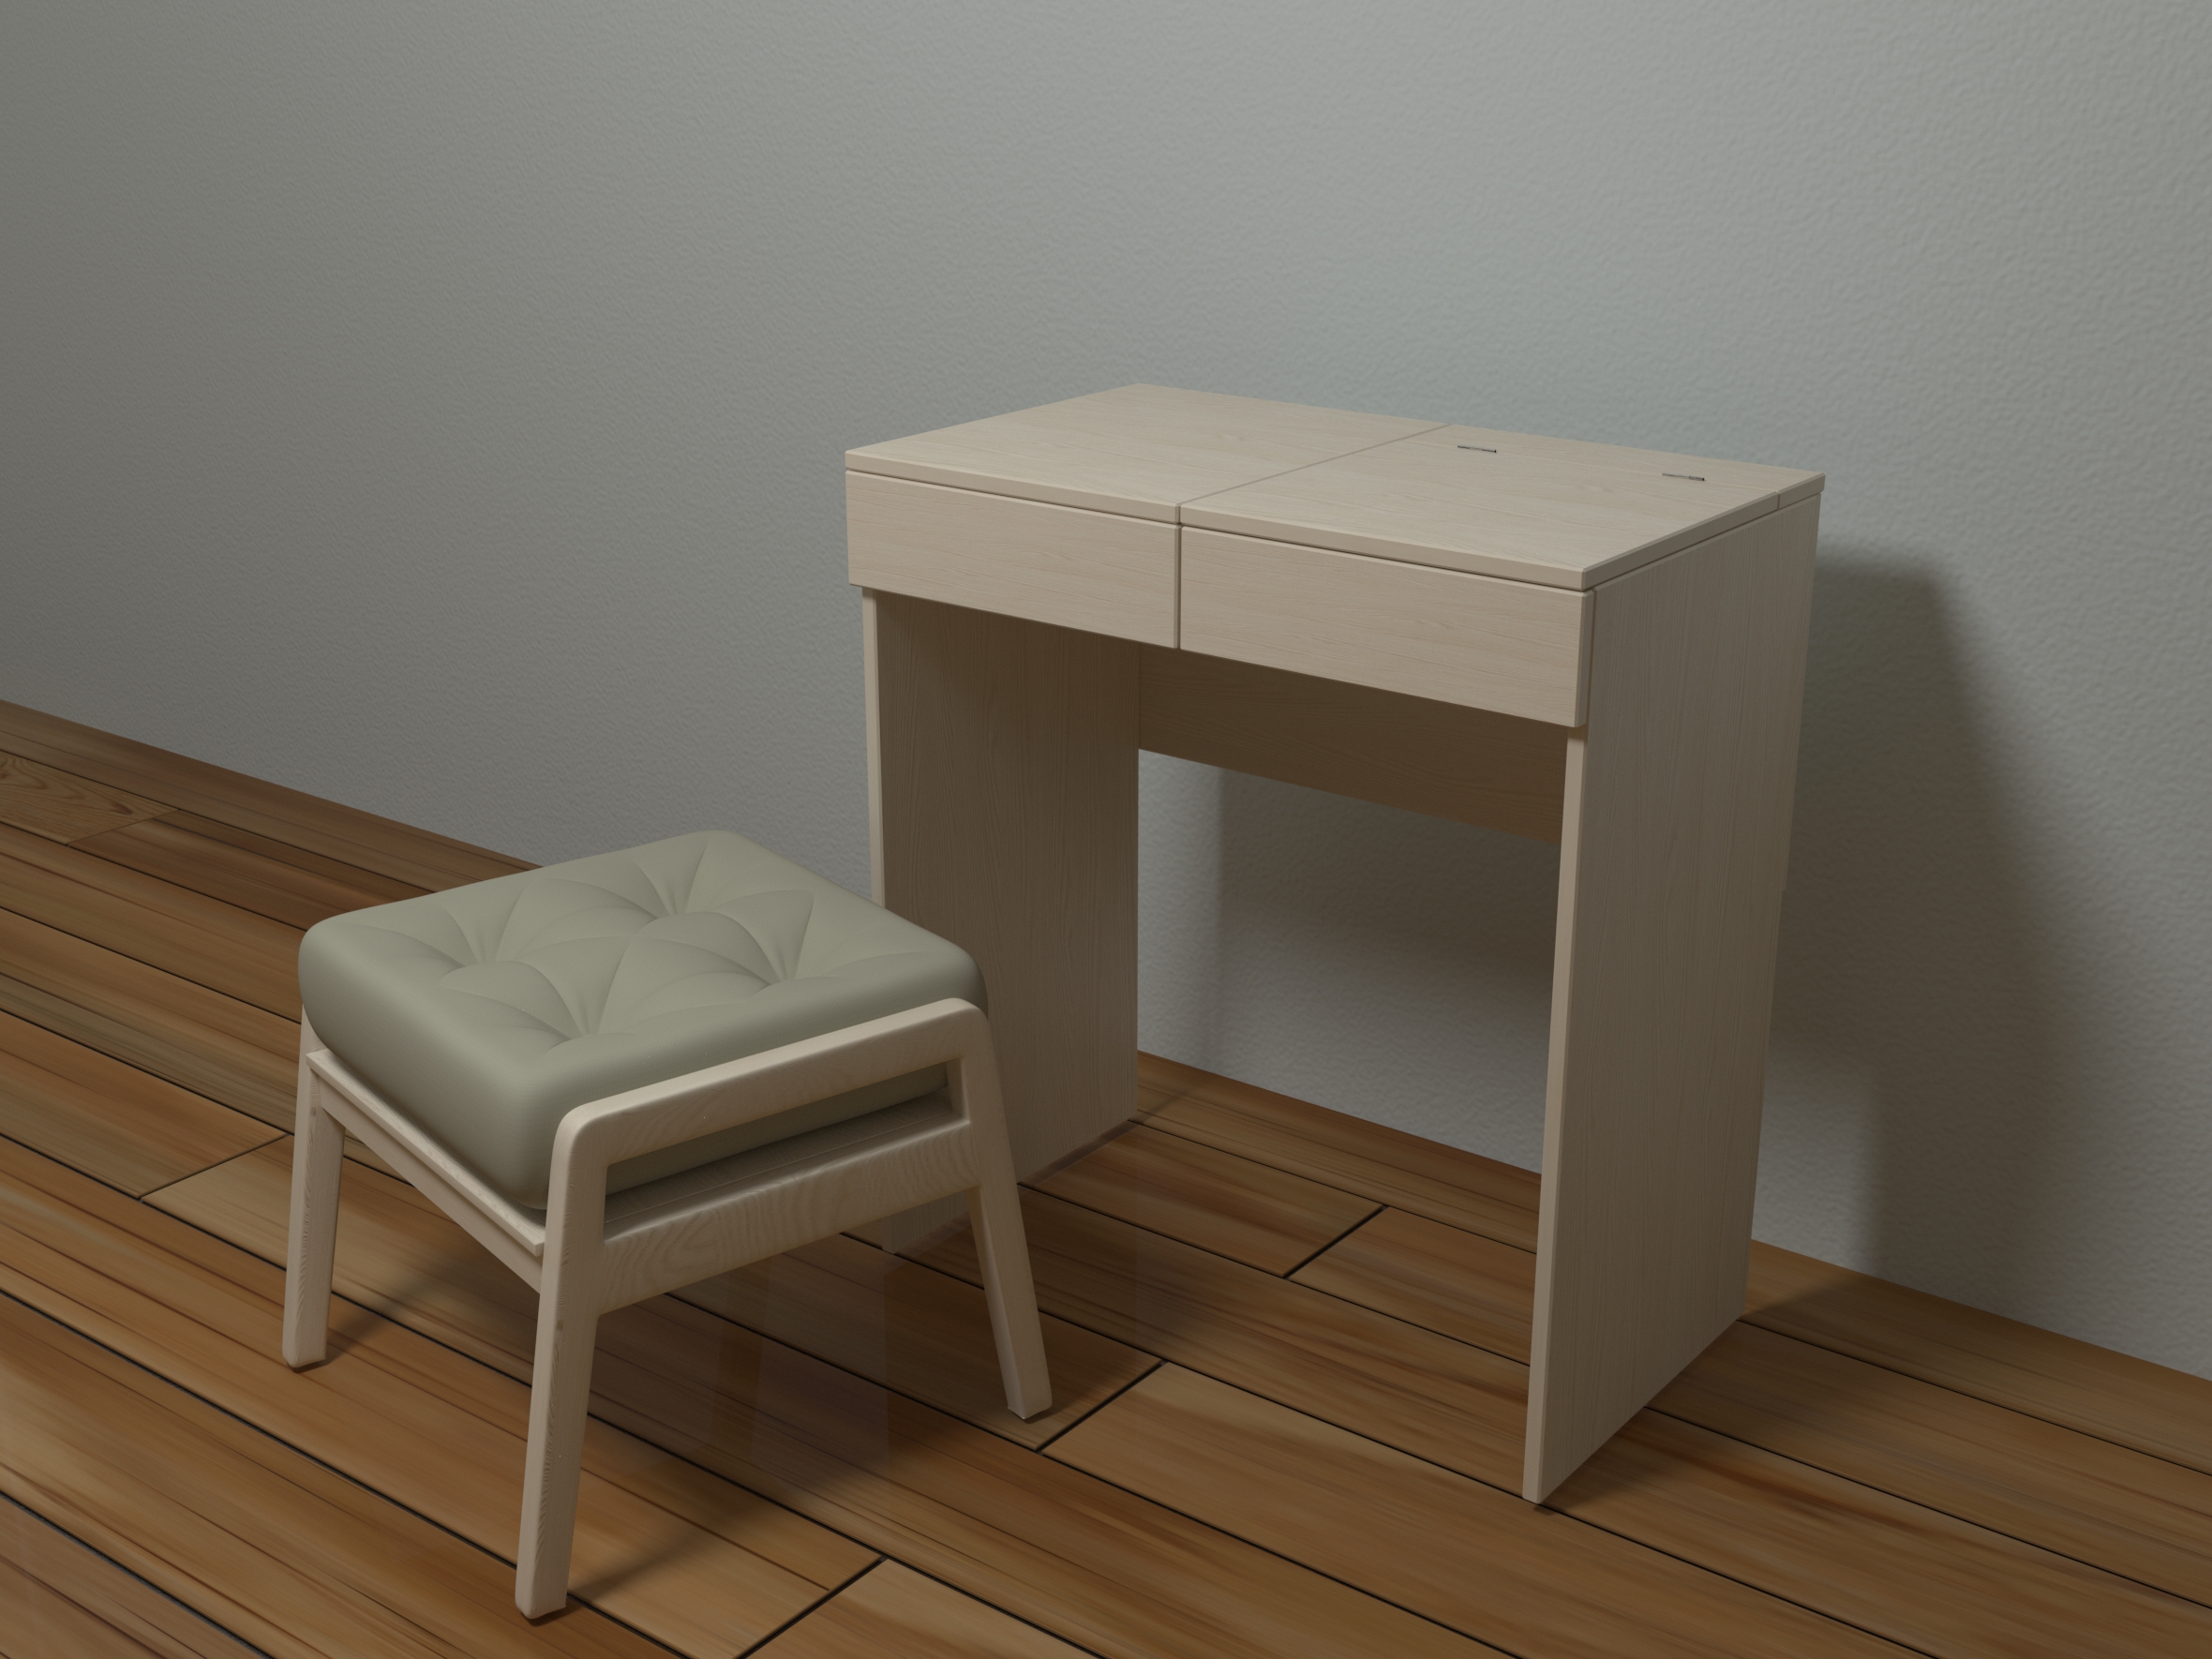 Dressing table and ottoman in 3d max corona render image